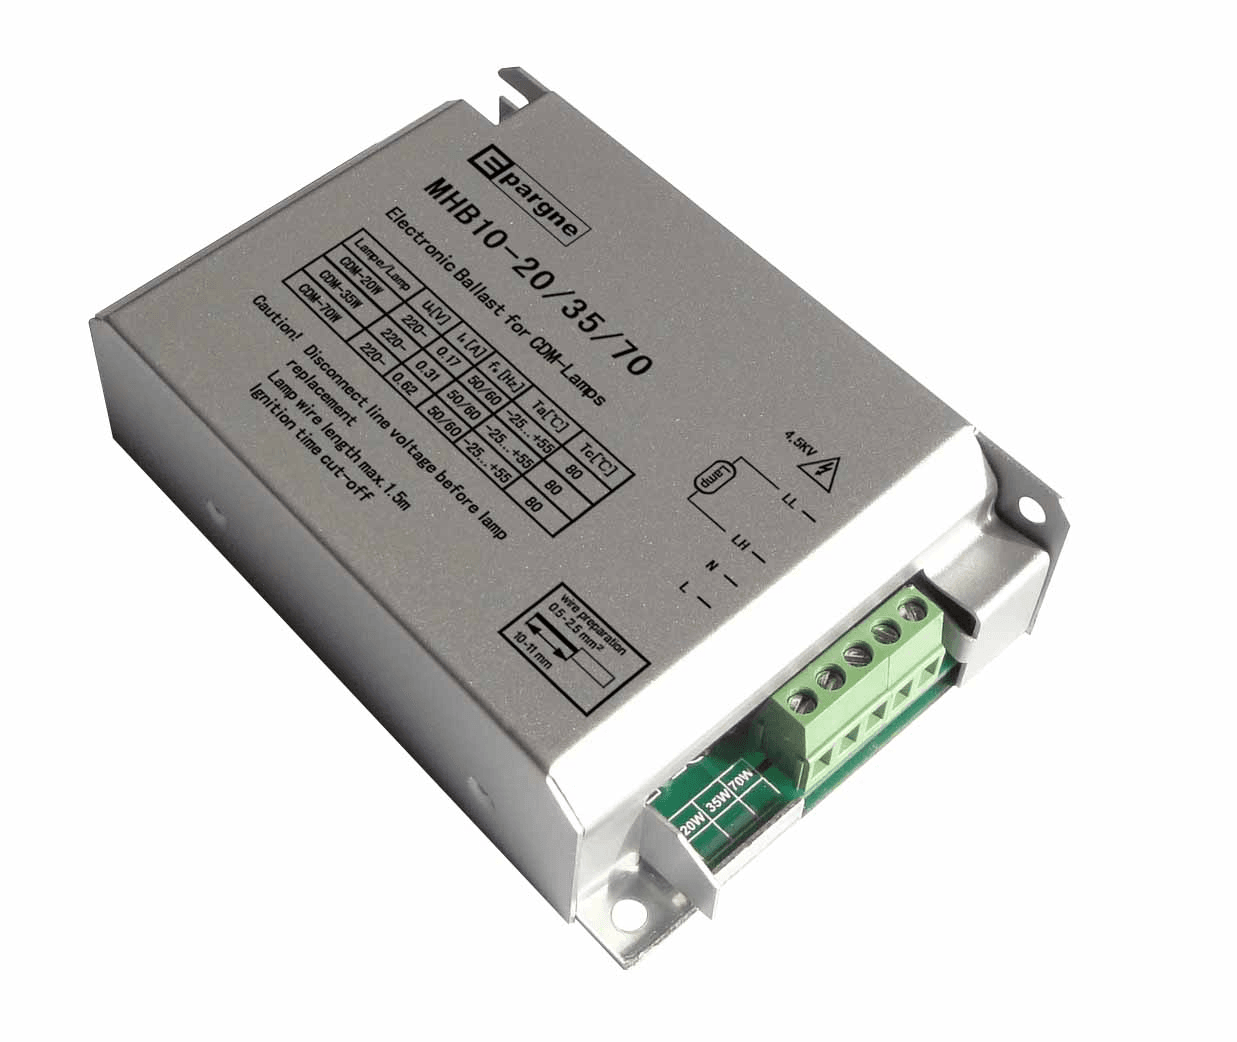 Power ballasts in heat dissipation applications